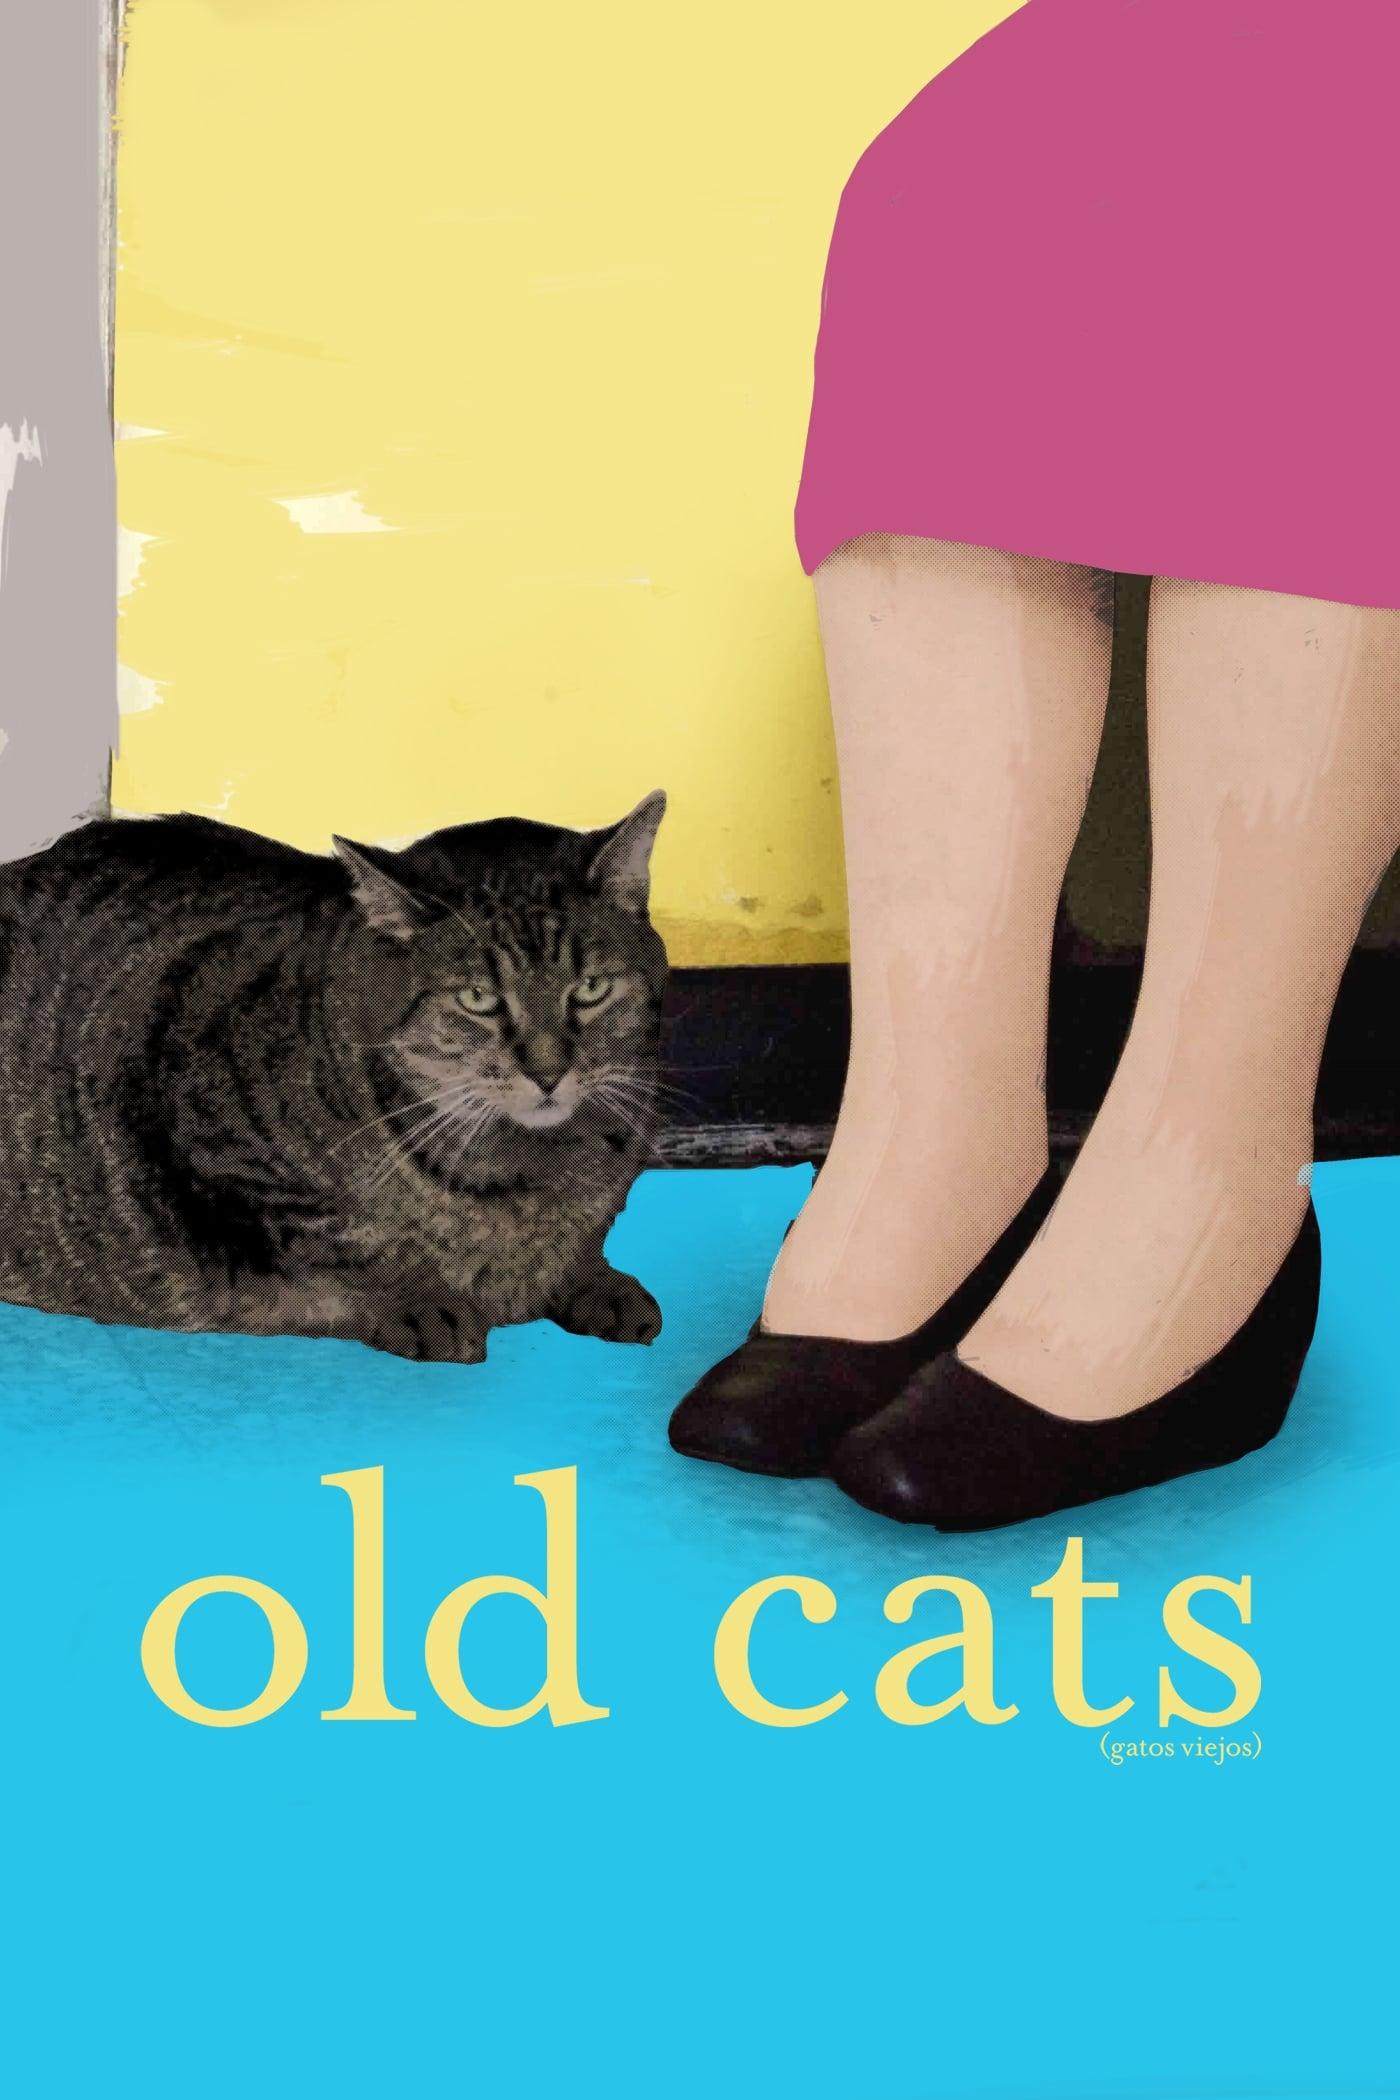 Old Cats poster